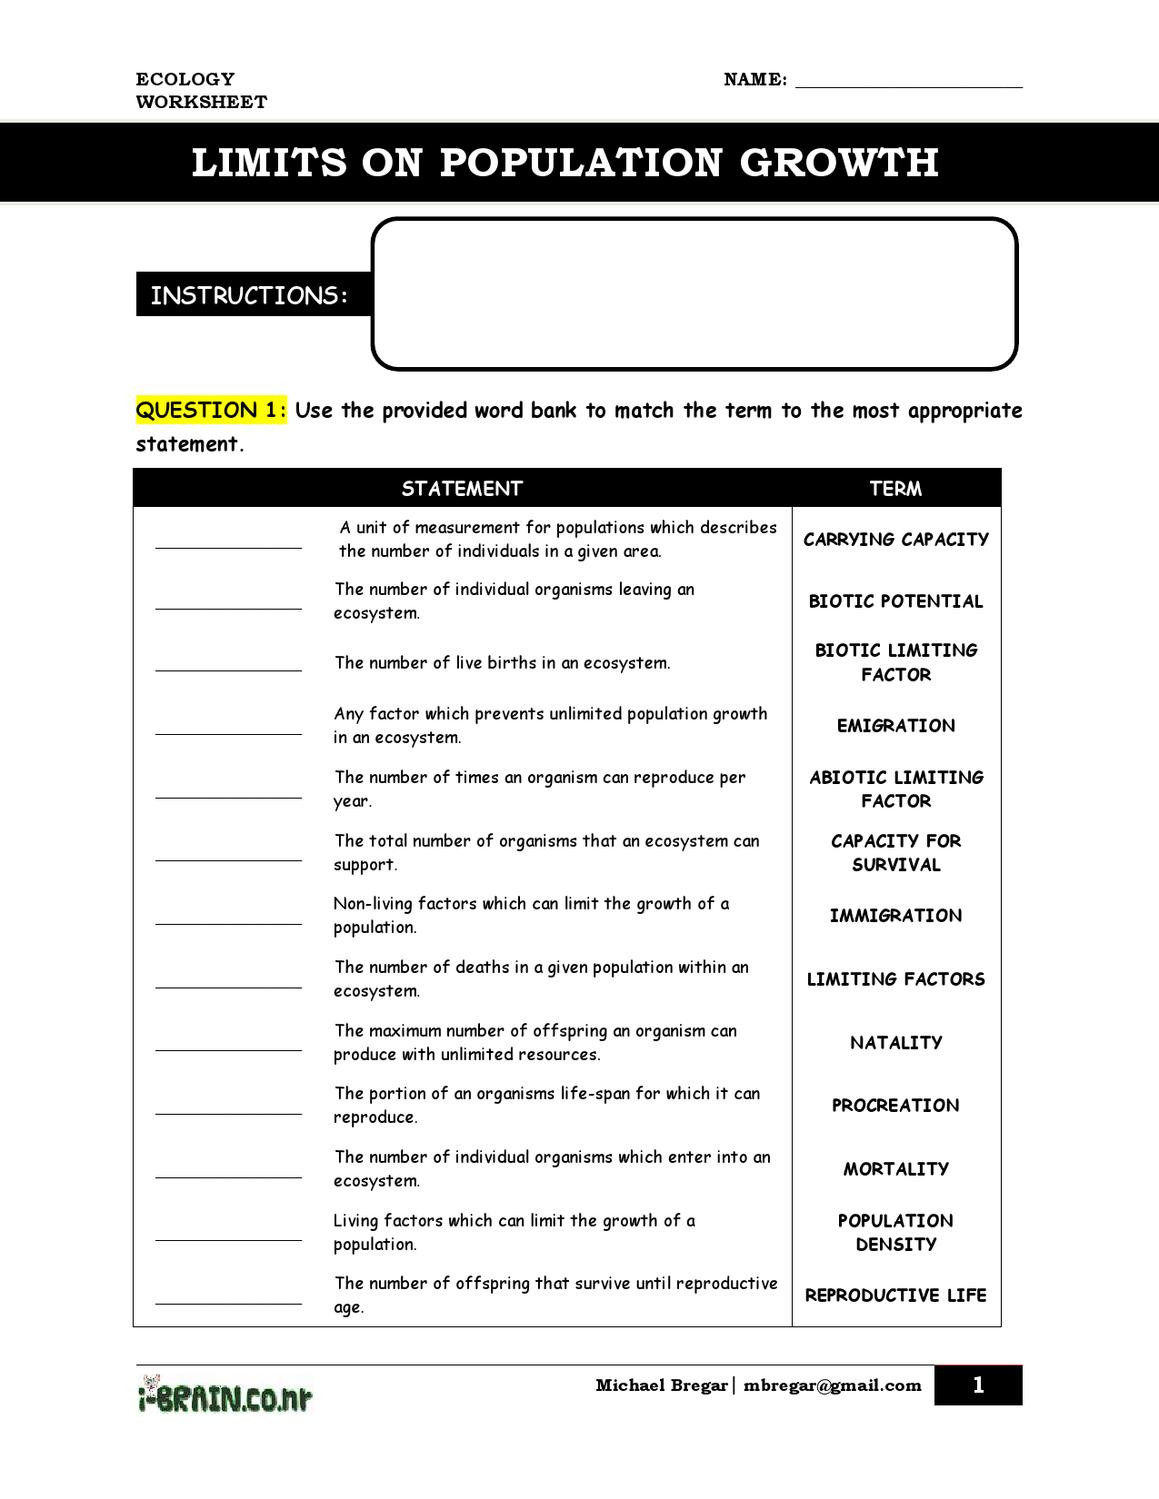 Abiotic and Biotic Factors Worksheet Workhseet Limits On Population Growth by Michael Bregar